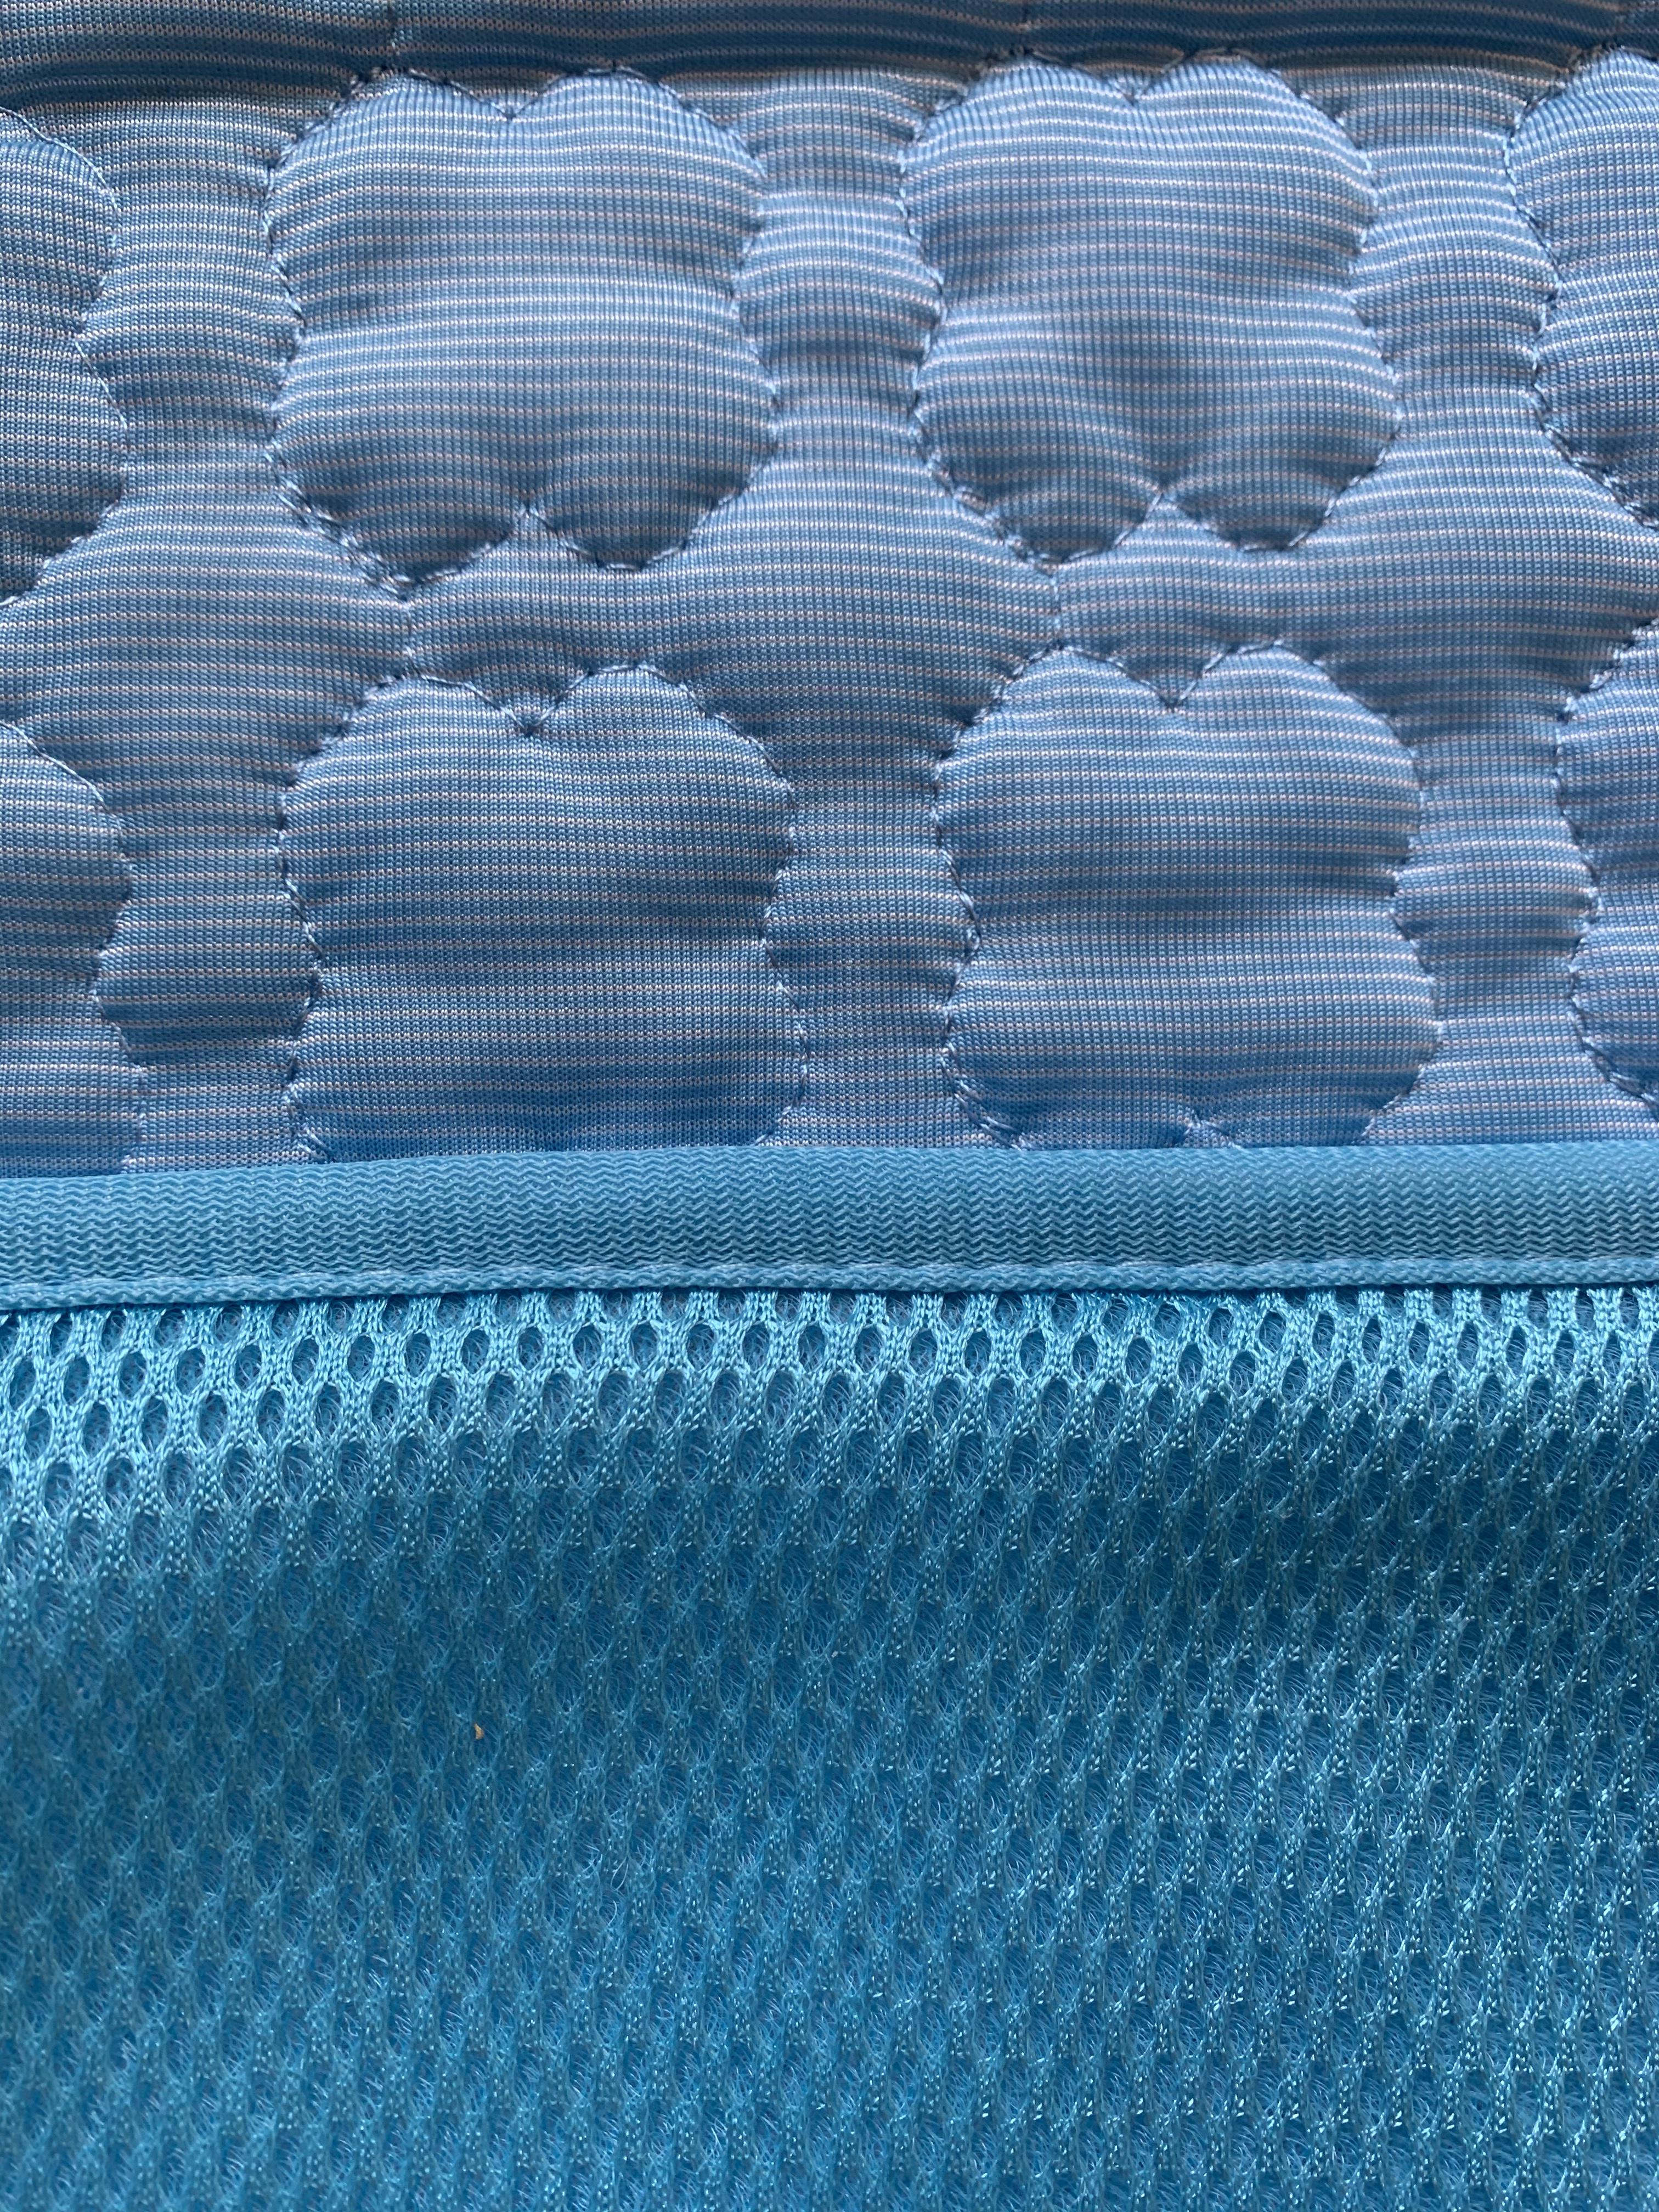 Close up of blue cooling mat material